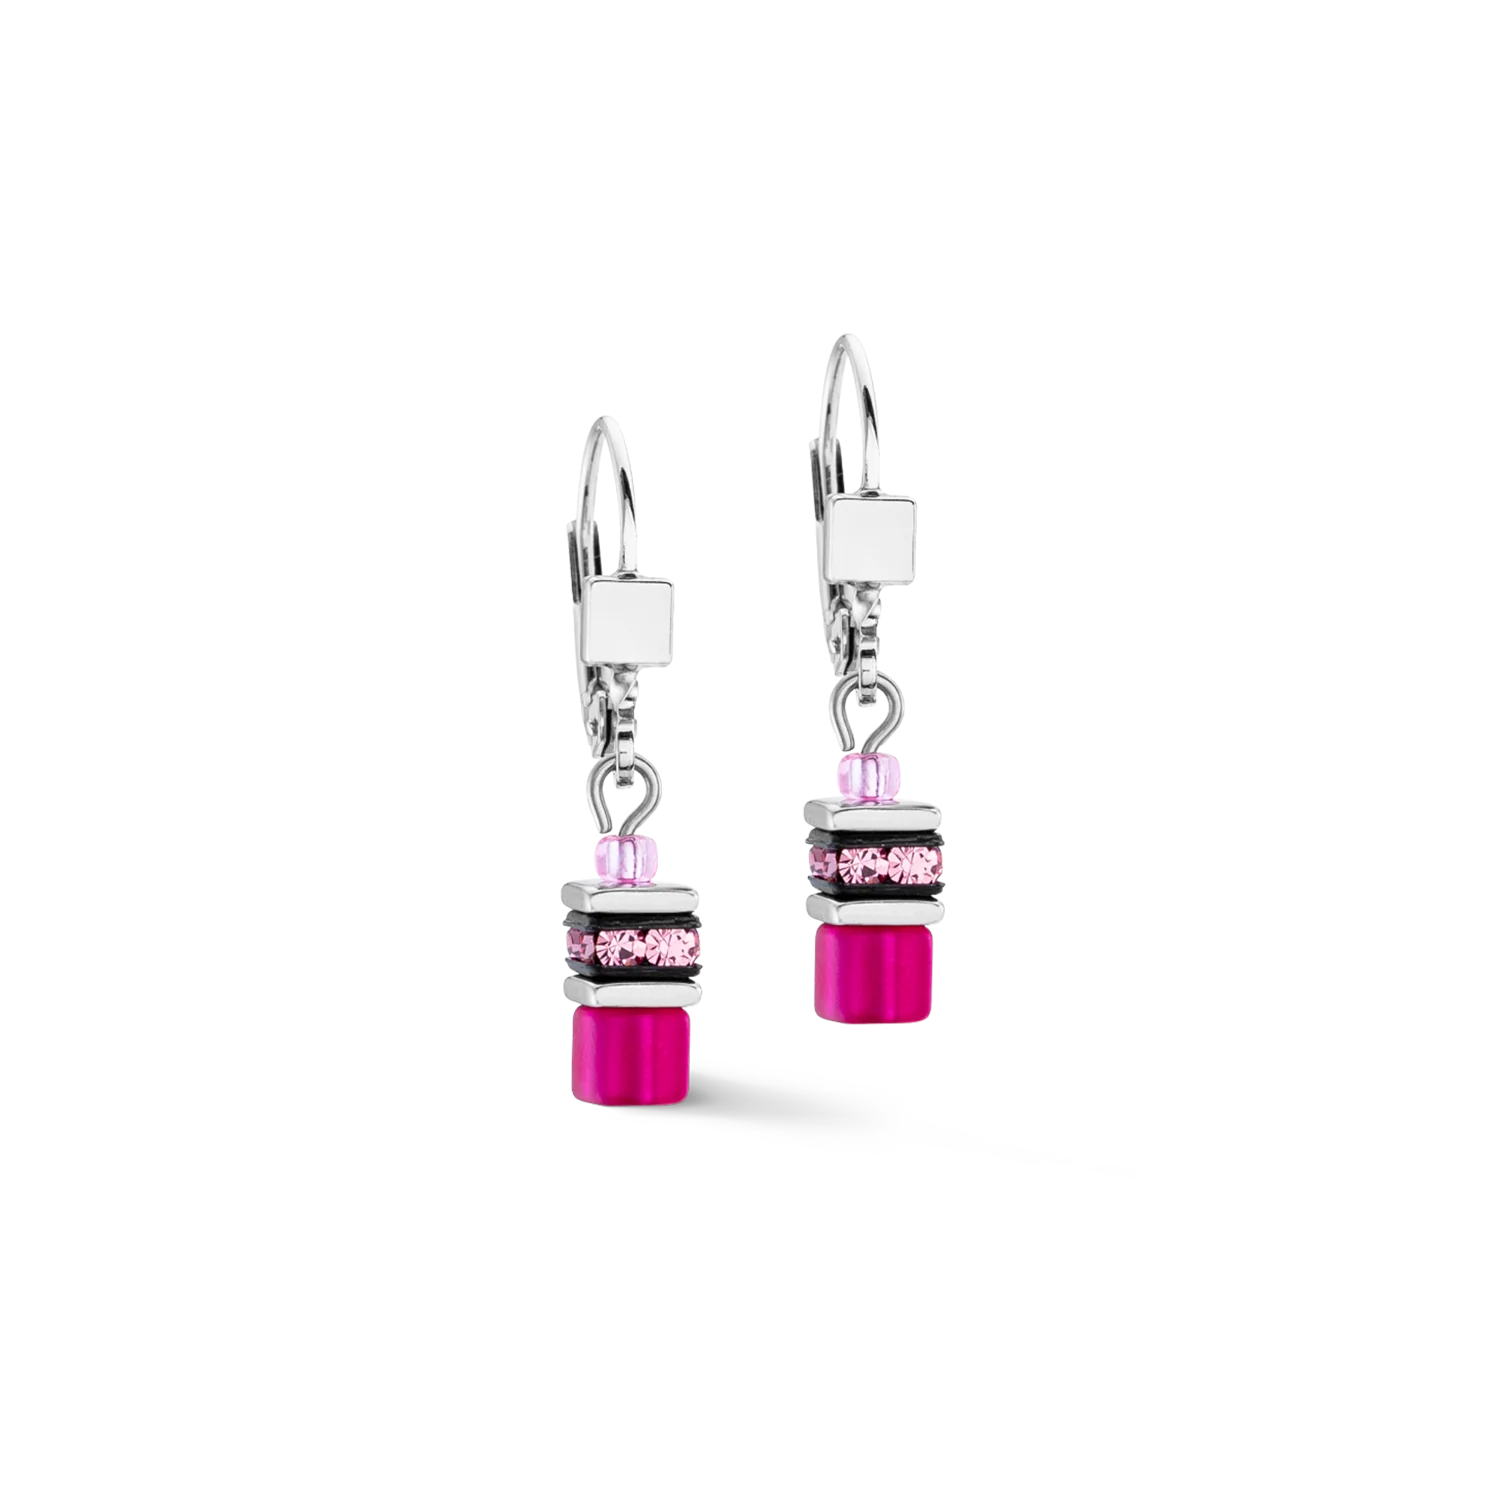 A pair of drop earrings with bright pink polaris cubes